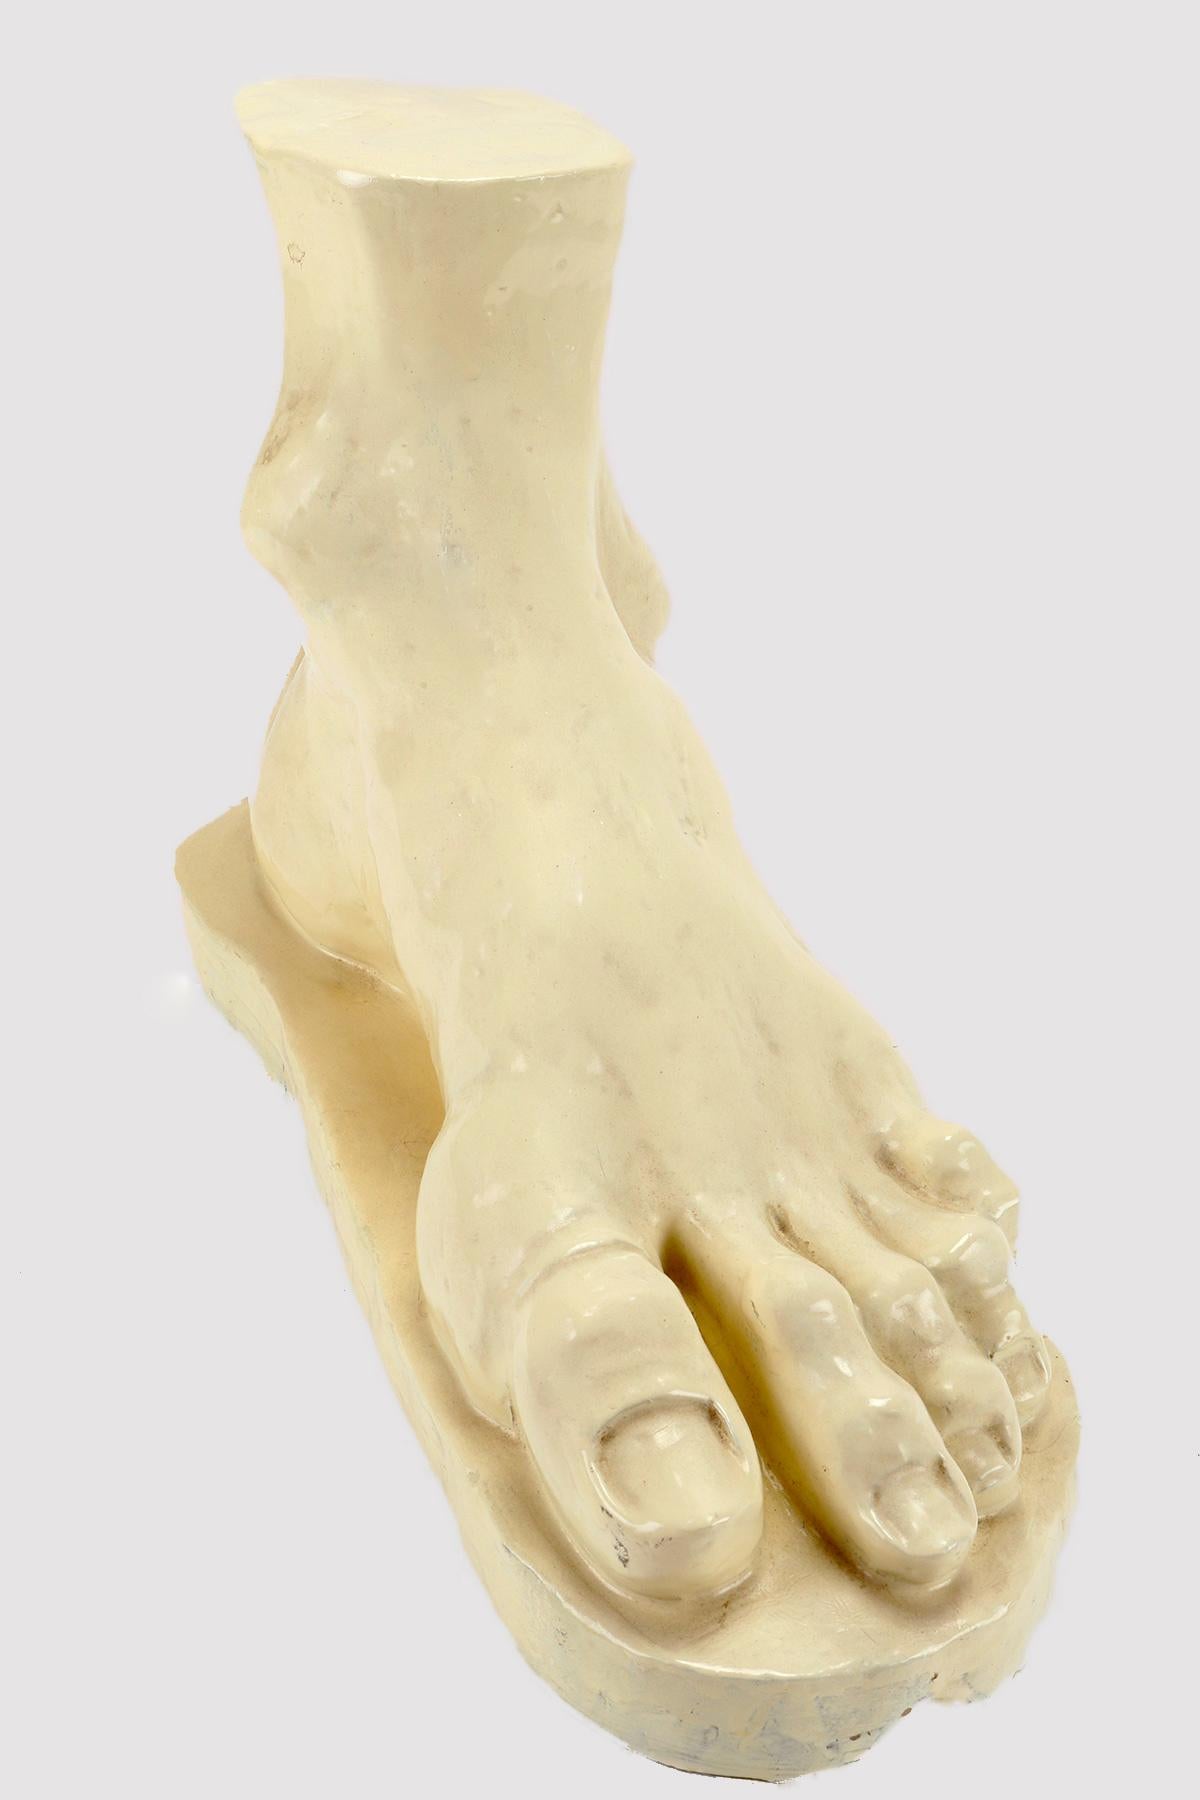 Sculpture in gray terracotta glazed in white, depicting a foot. The sculpture is obtained by gradually adding individual terracotta elements by hand. The foot is an example of sculptural excellence in both movement and detail. The sculpture is